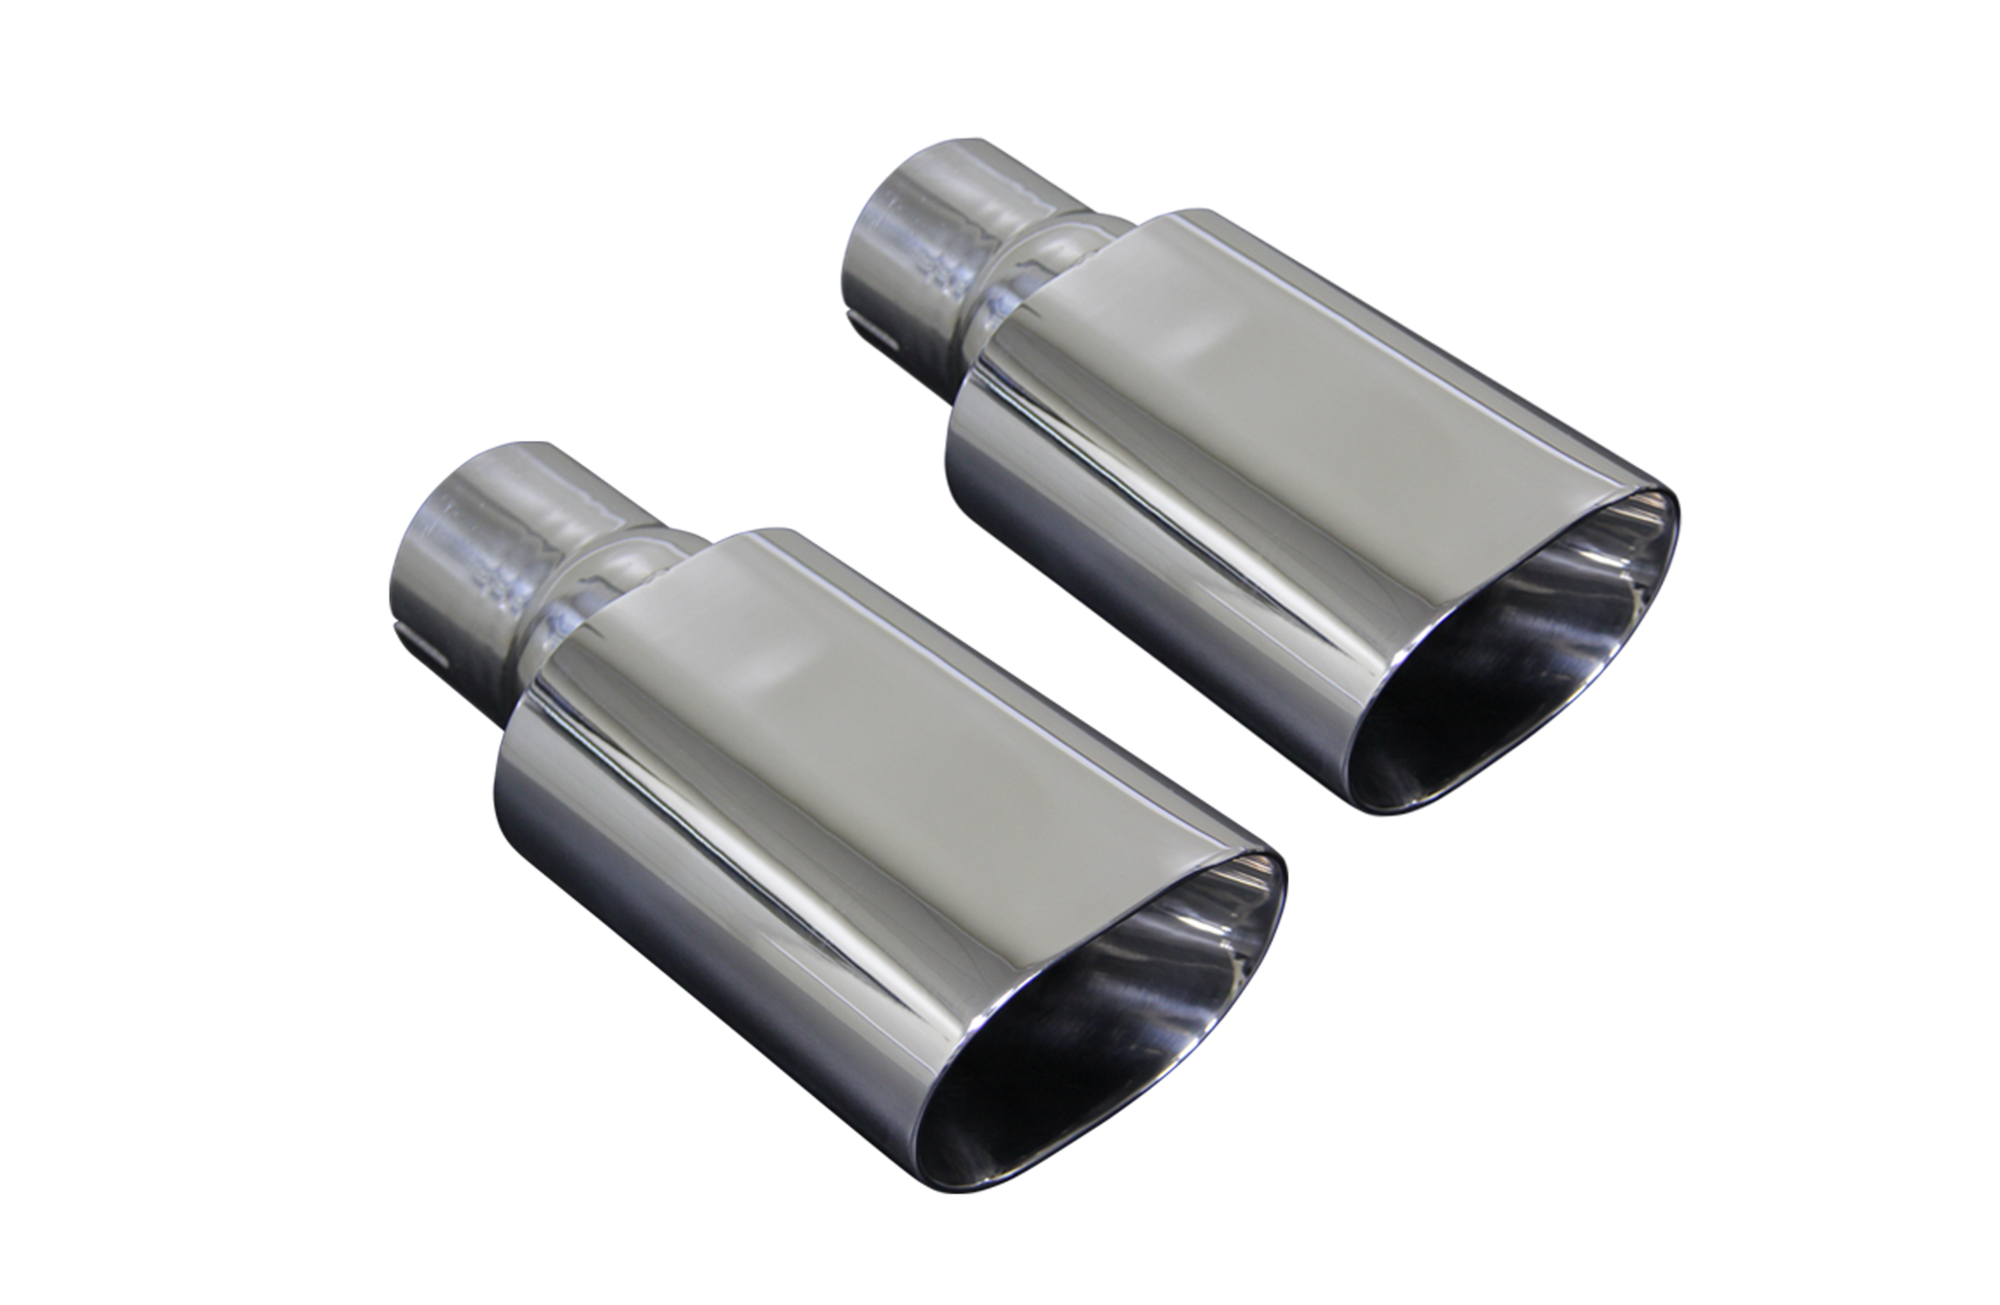 Chevelle Tips - Double Walled, Polished Stainless Steel